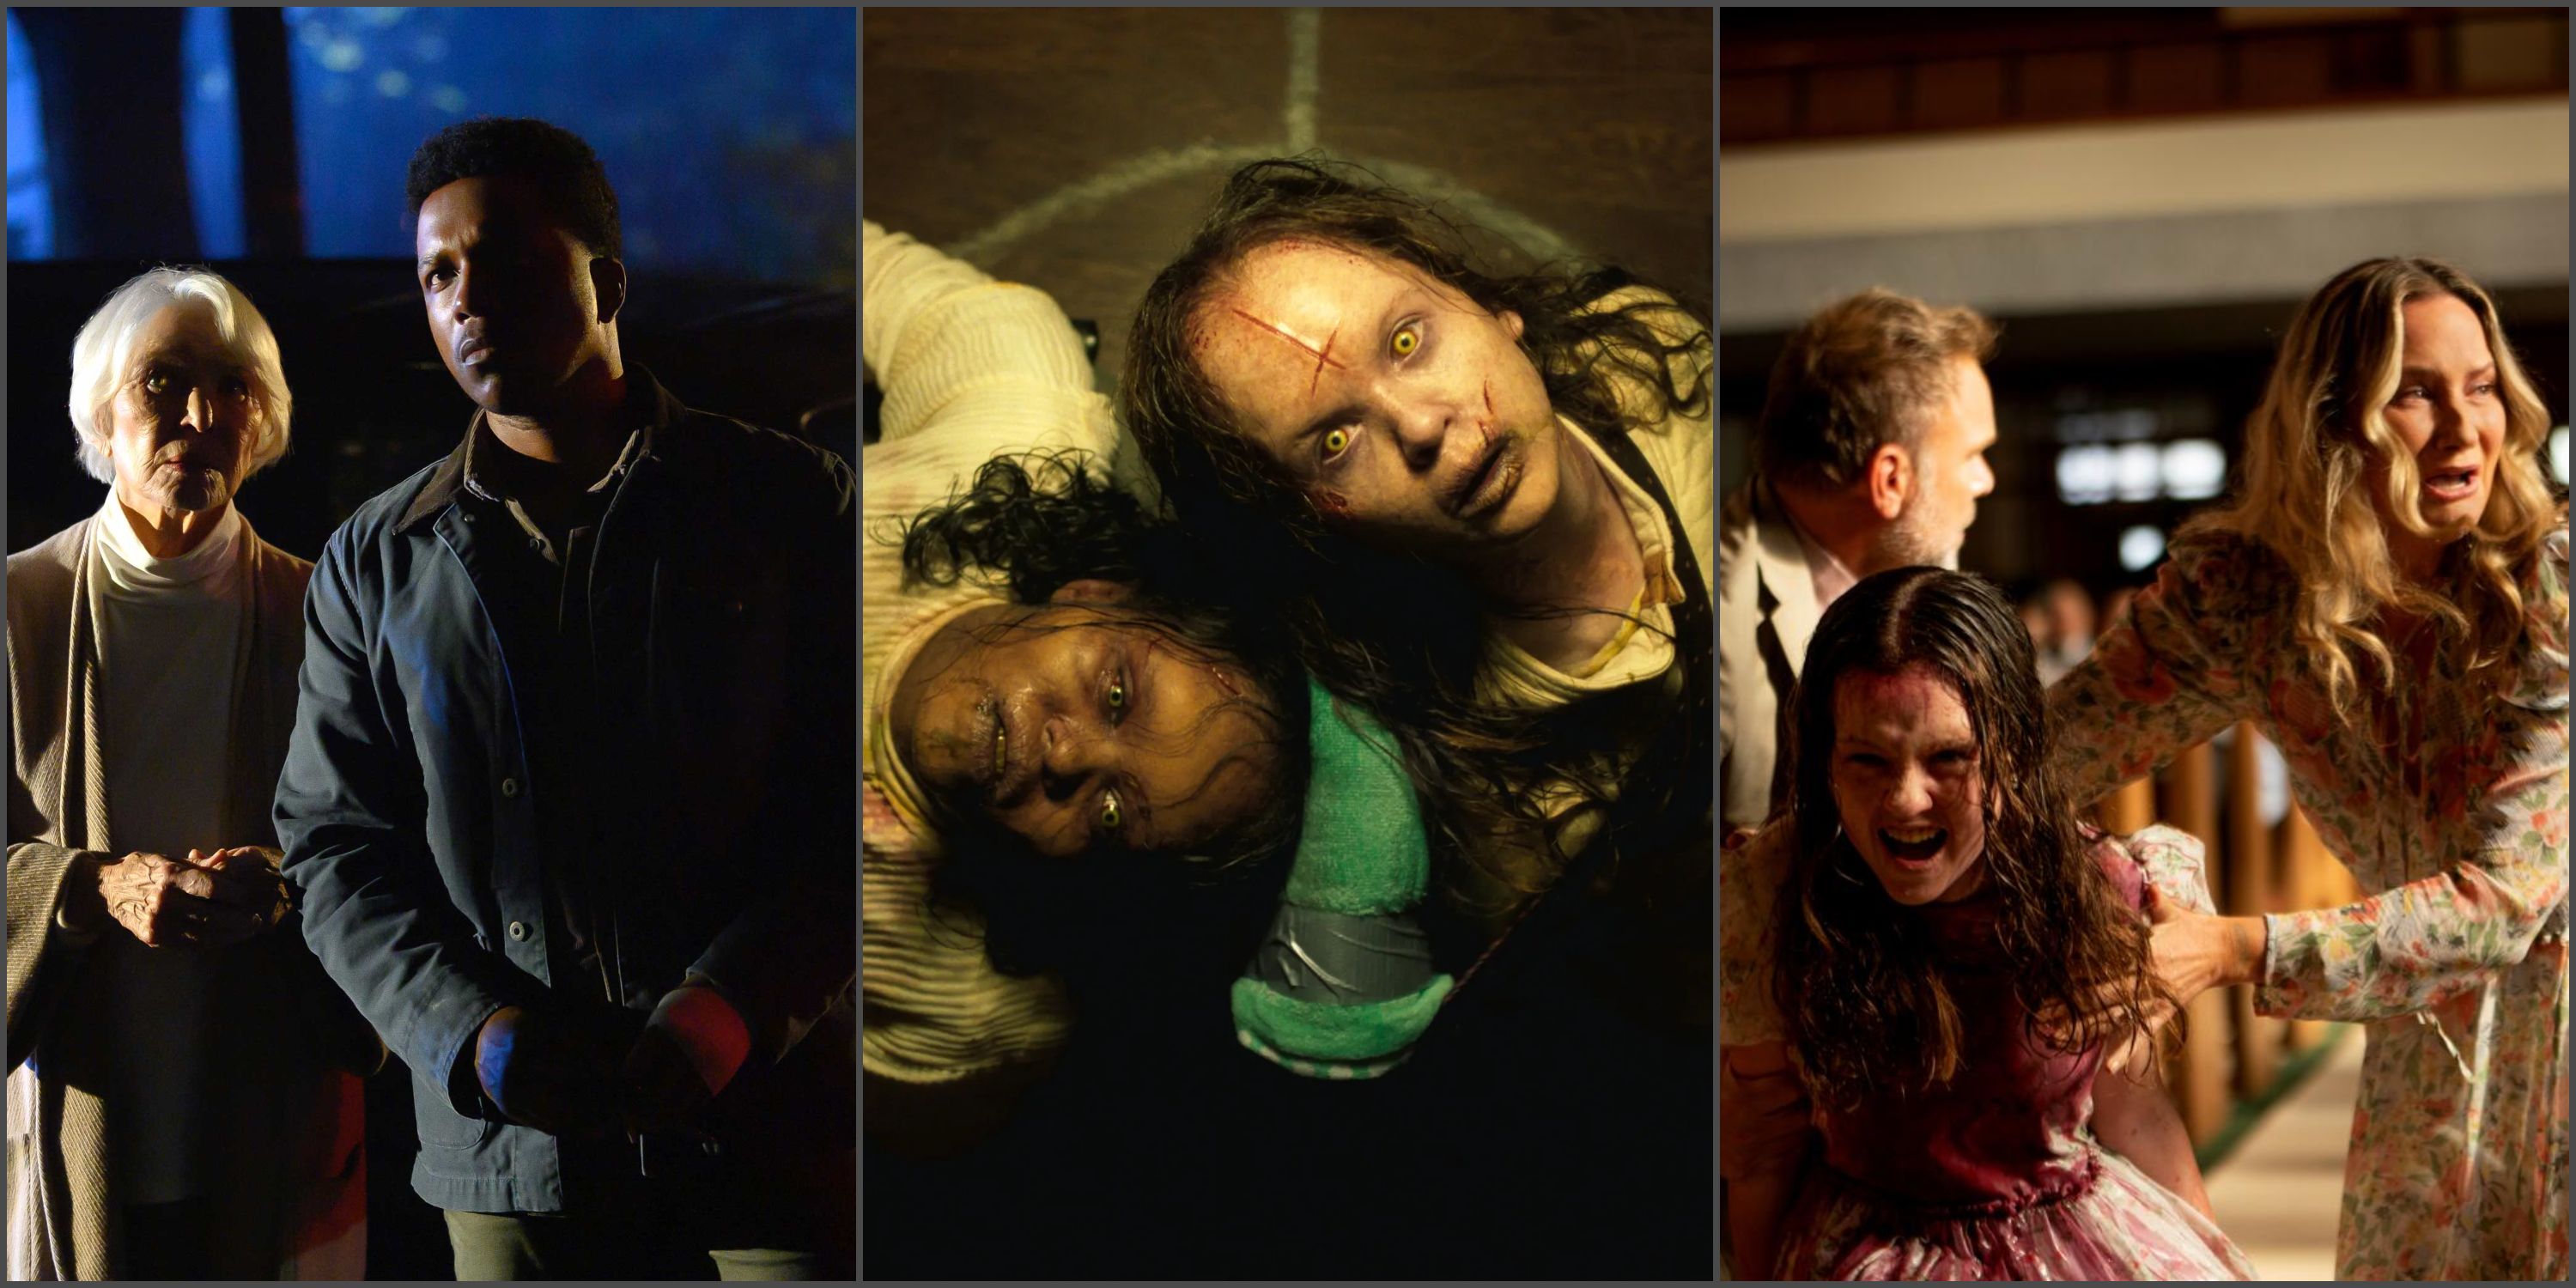 The Exorcist: Believer - Victor and Chris, Katherine and Angela's exorcism, and Katherine screaming in church